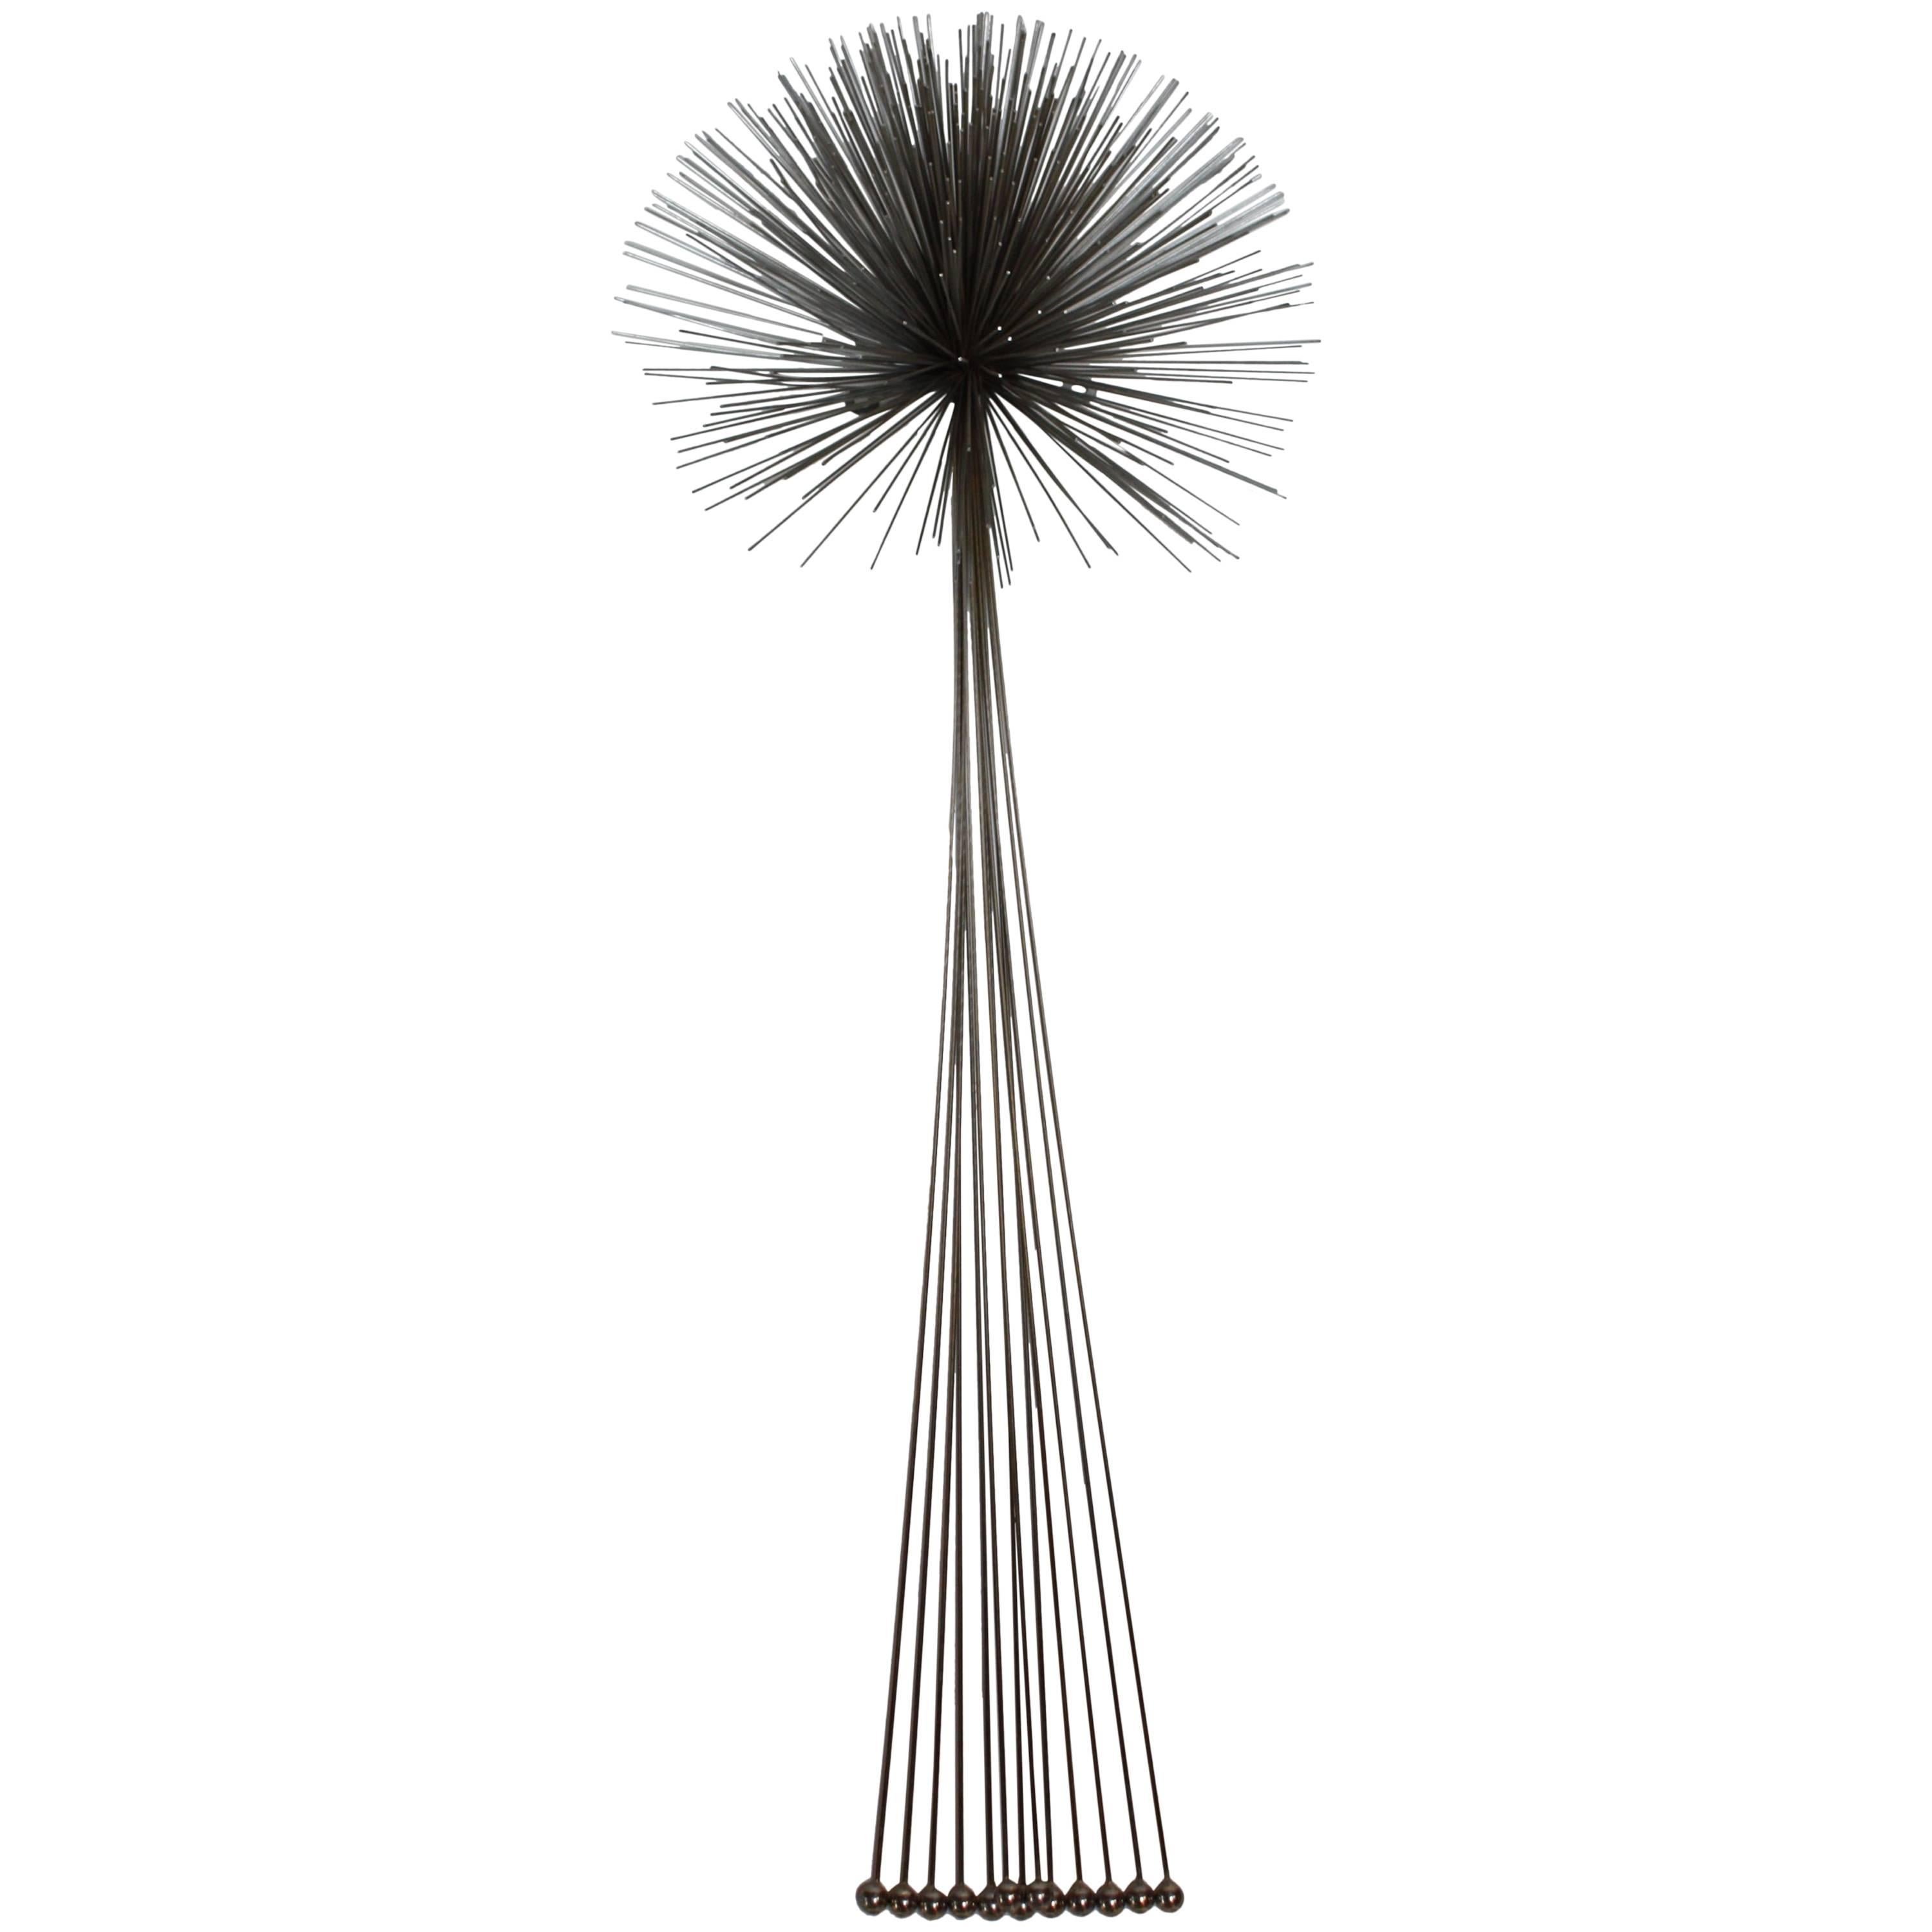 Mixed Metal Curtis Jere Elongated 'Urchin' Wall Sculpture For Sale